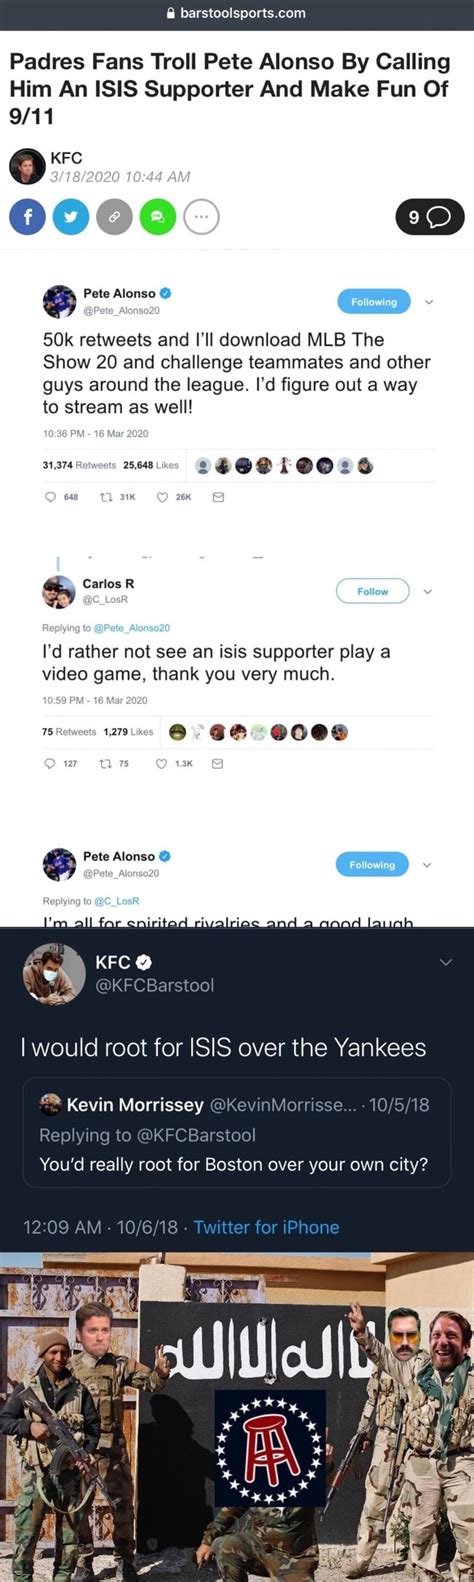 Barstoolsports Com Padres Fans Troll Pete Alonso By Calling Him An ISIS Supporter And Make Fun